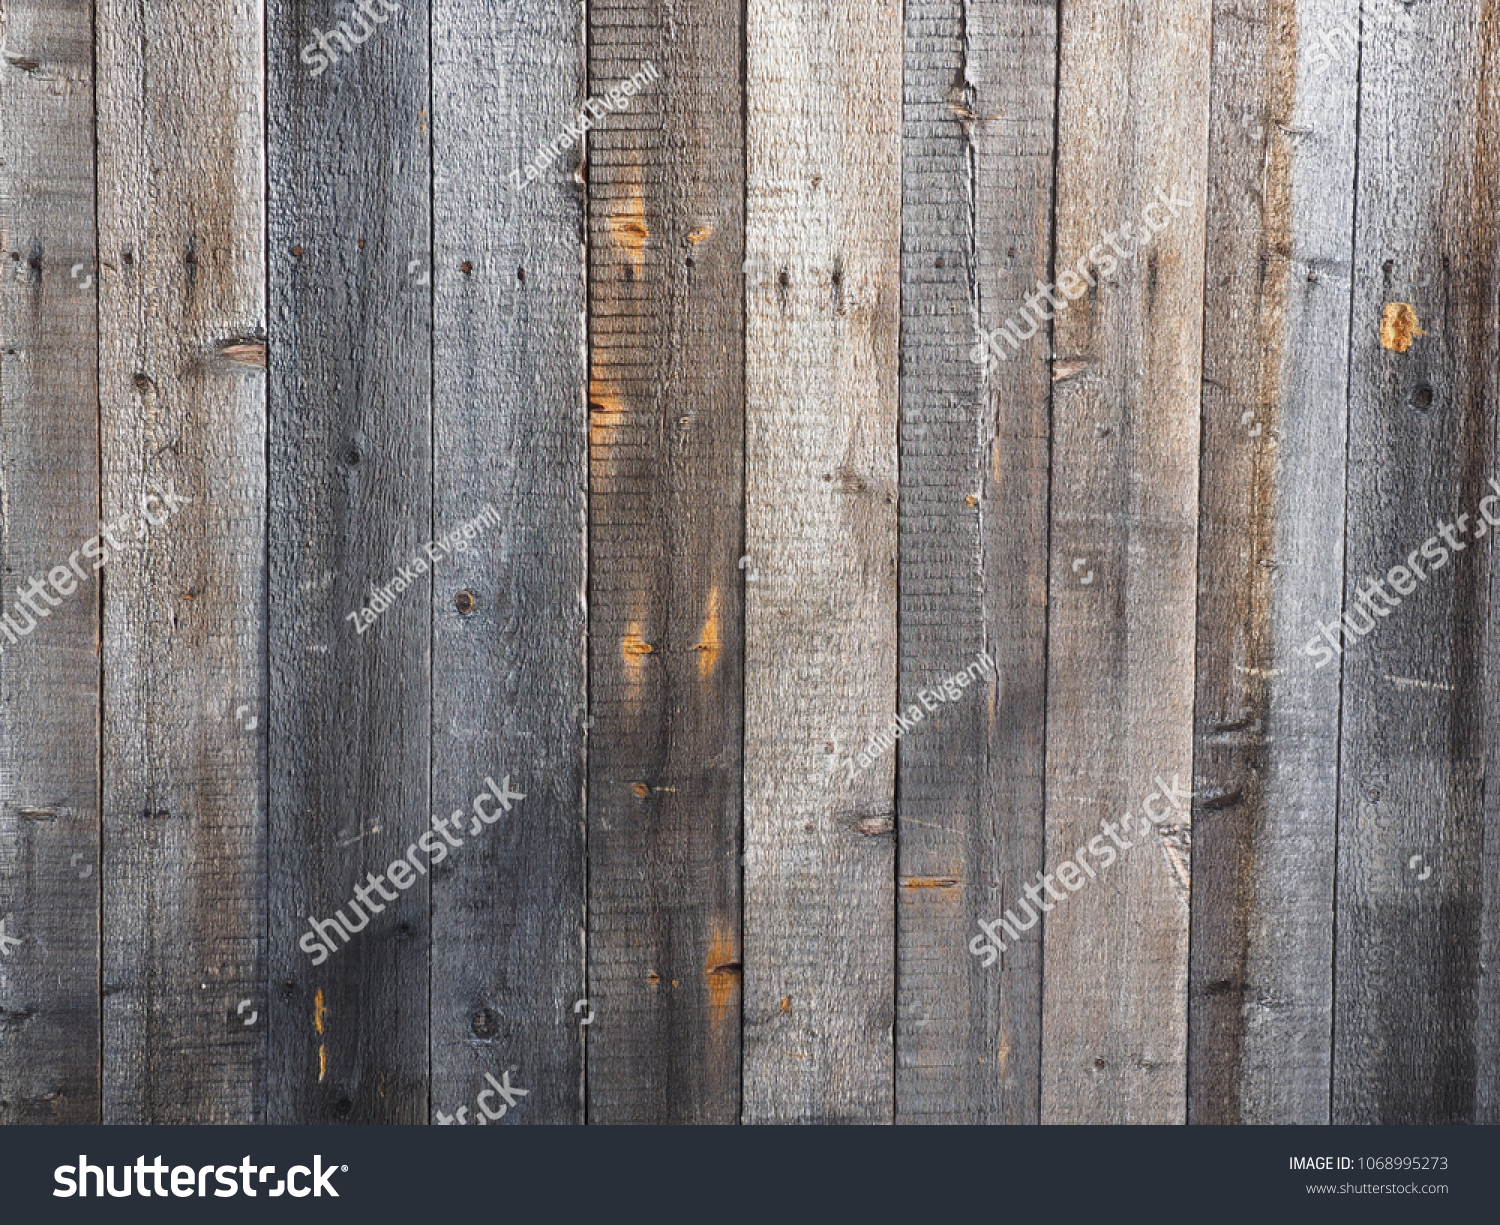 background of old wooden boards #1068995273